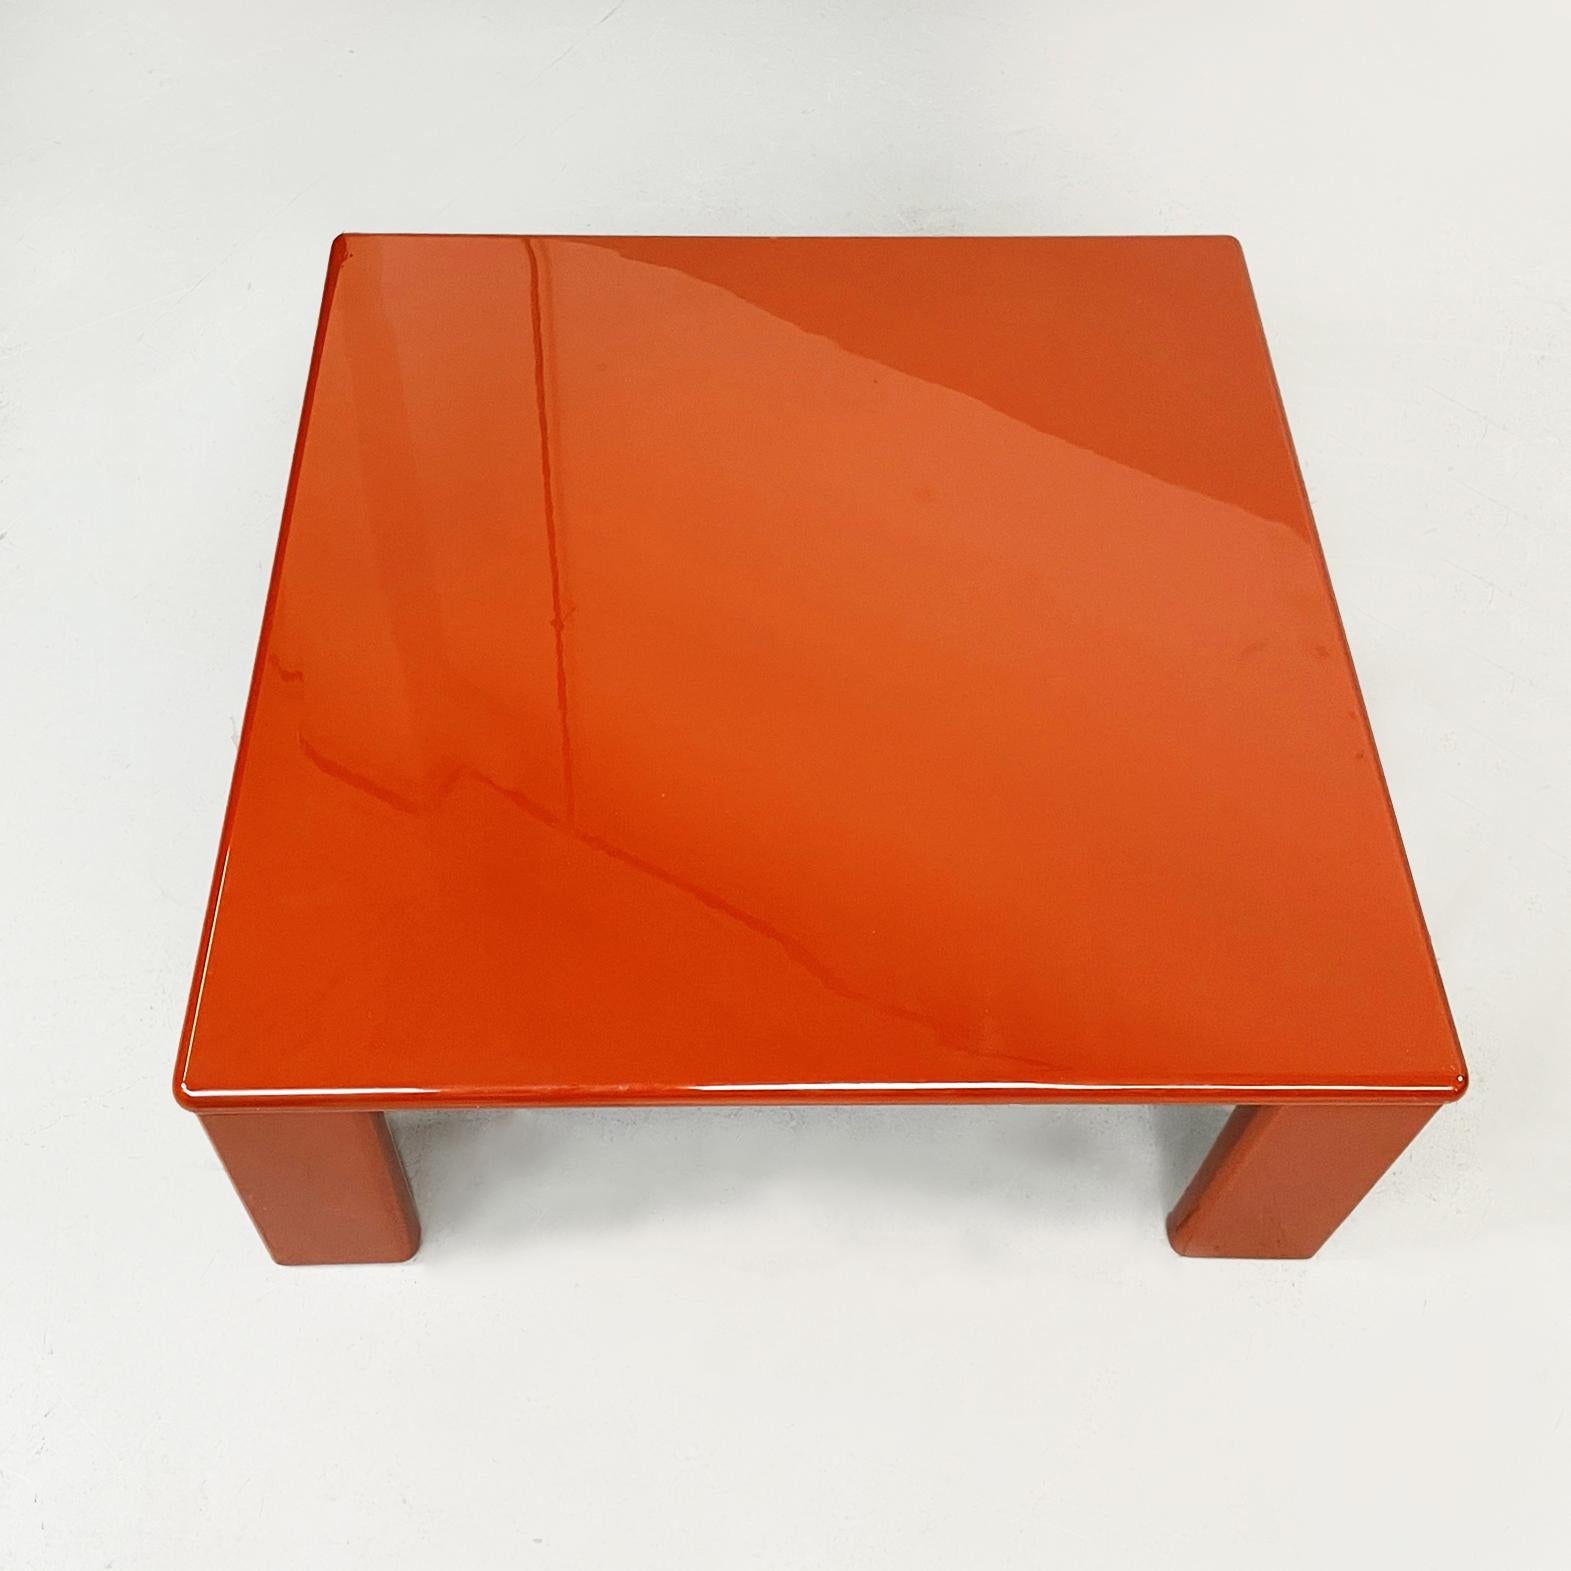 Lacquered Italian Mid-Century Red Wooden Coffee Table Ming by Takahama Gavina, 1980s